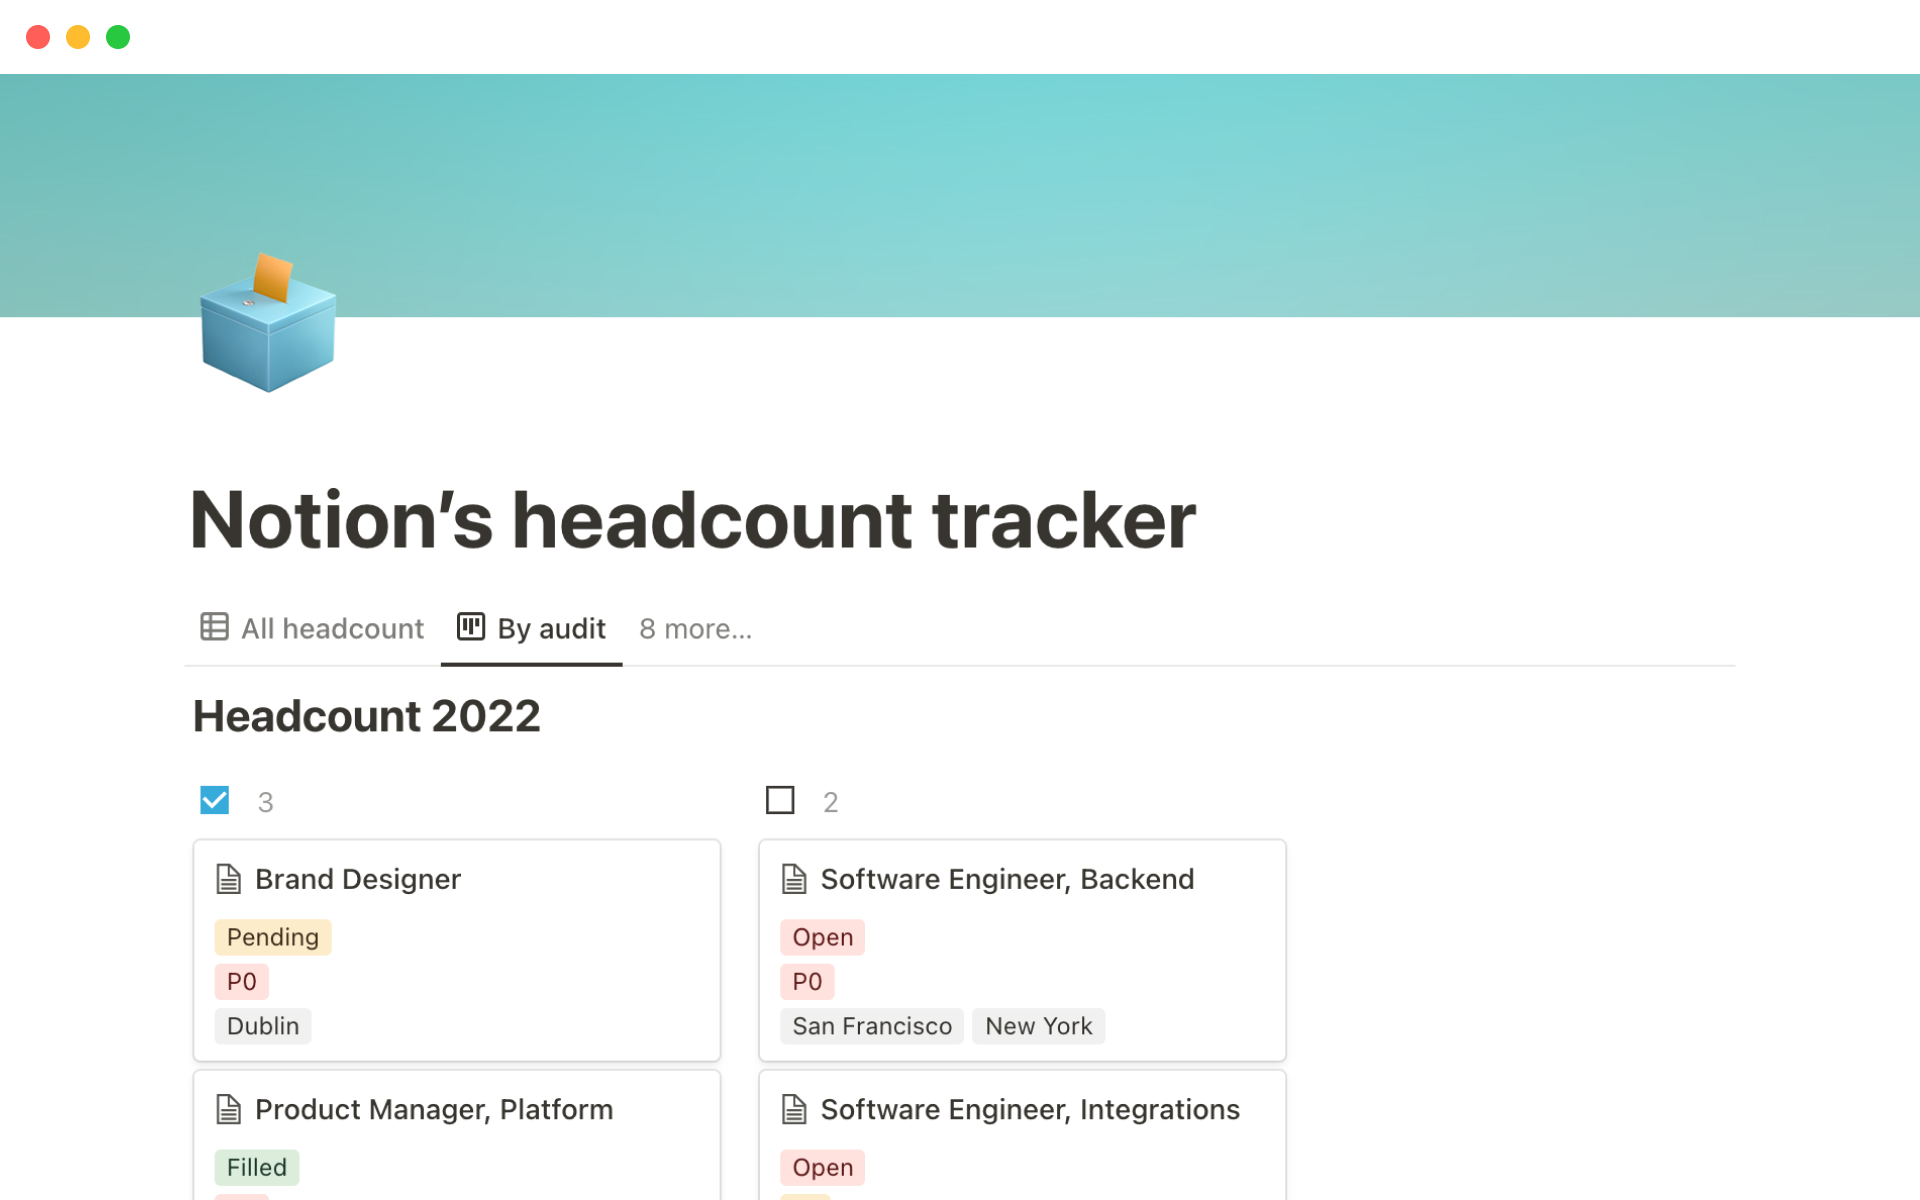 Drive clarity around yearly headcount and easily filter by team, quarter, priority, and more.